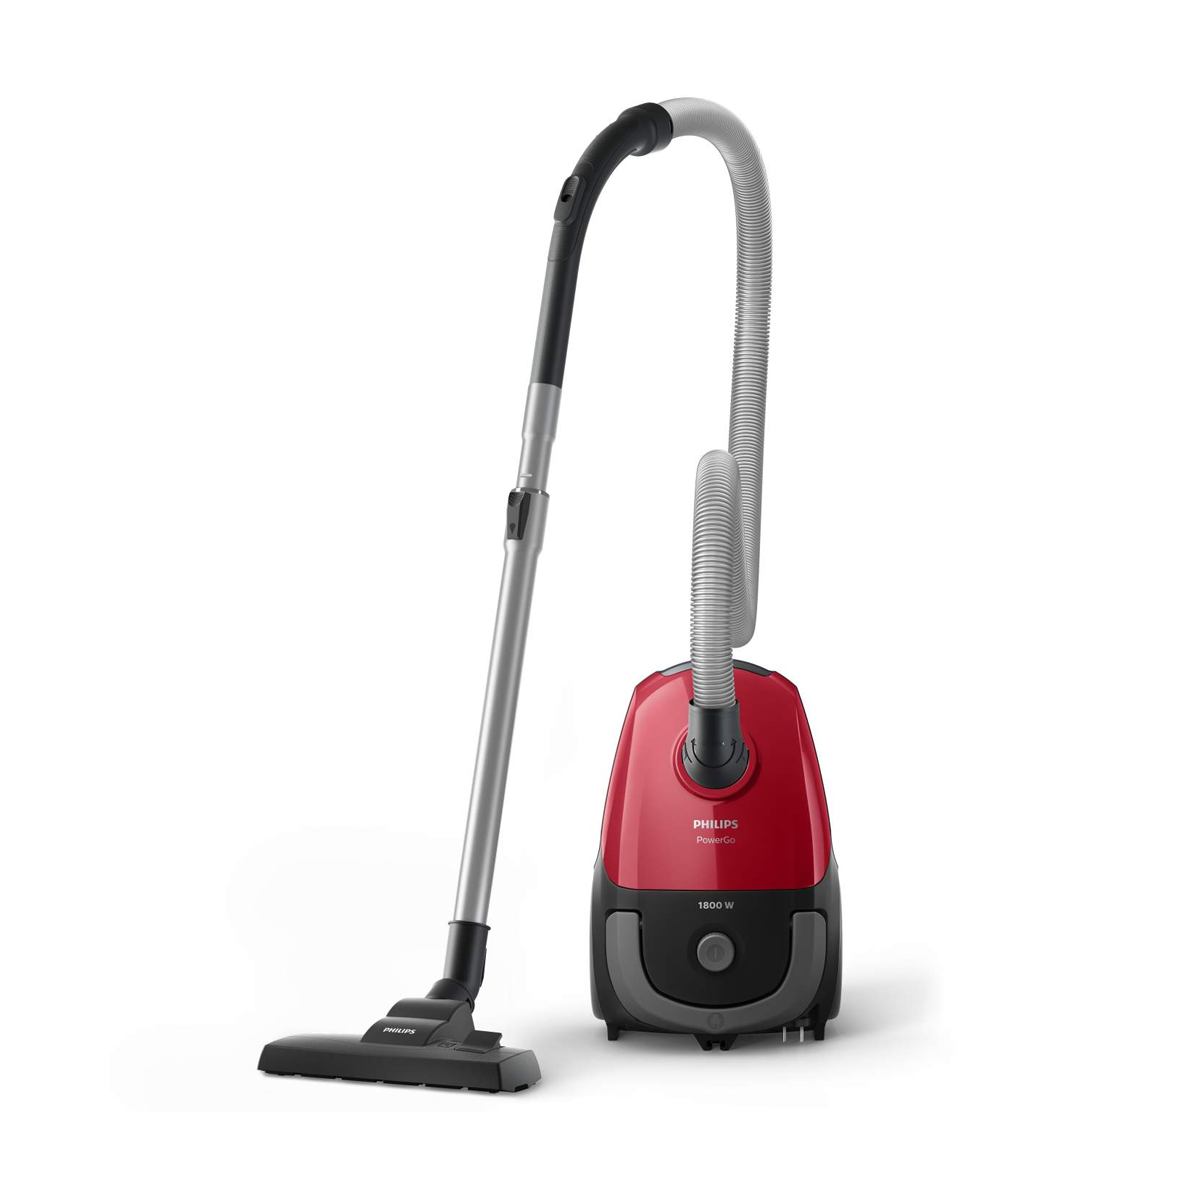 Philips Bagged Vacuum Cleaner 1800W